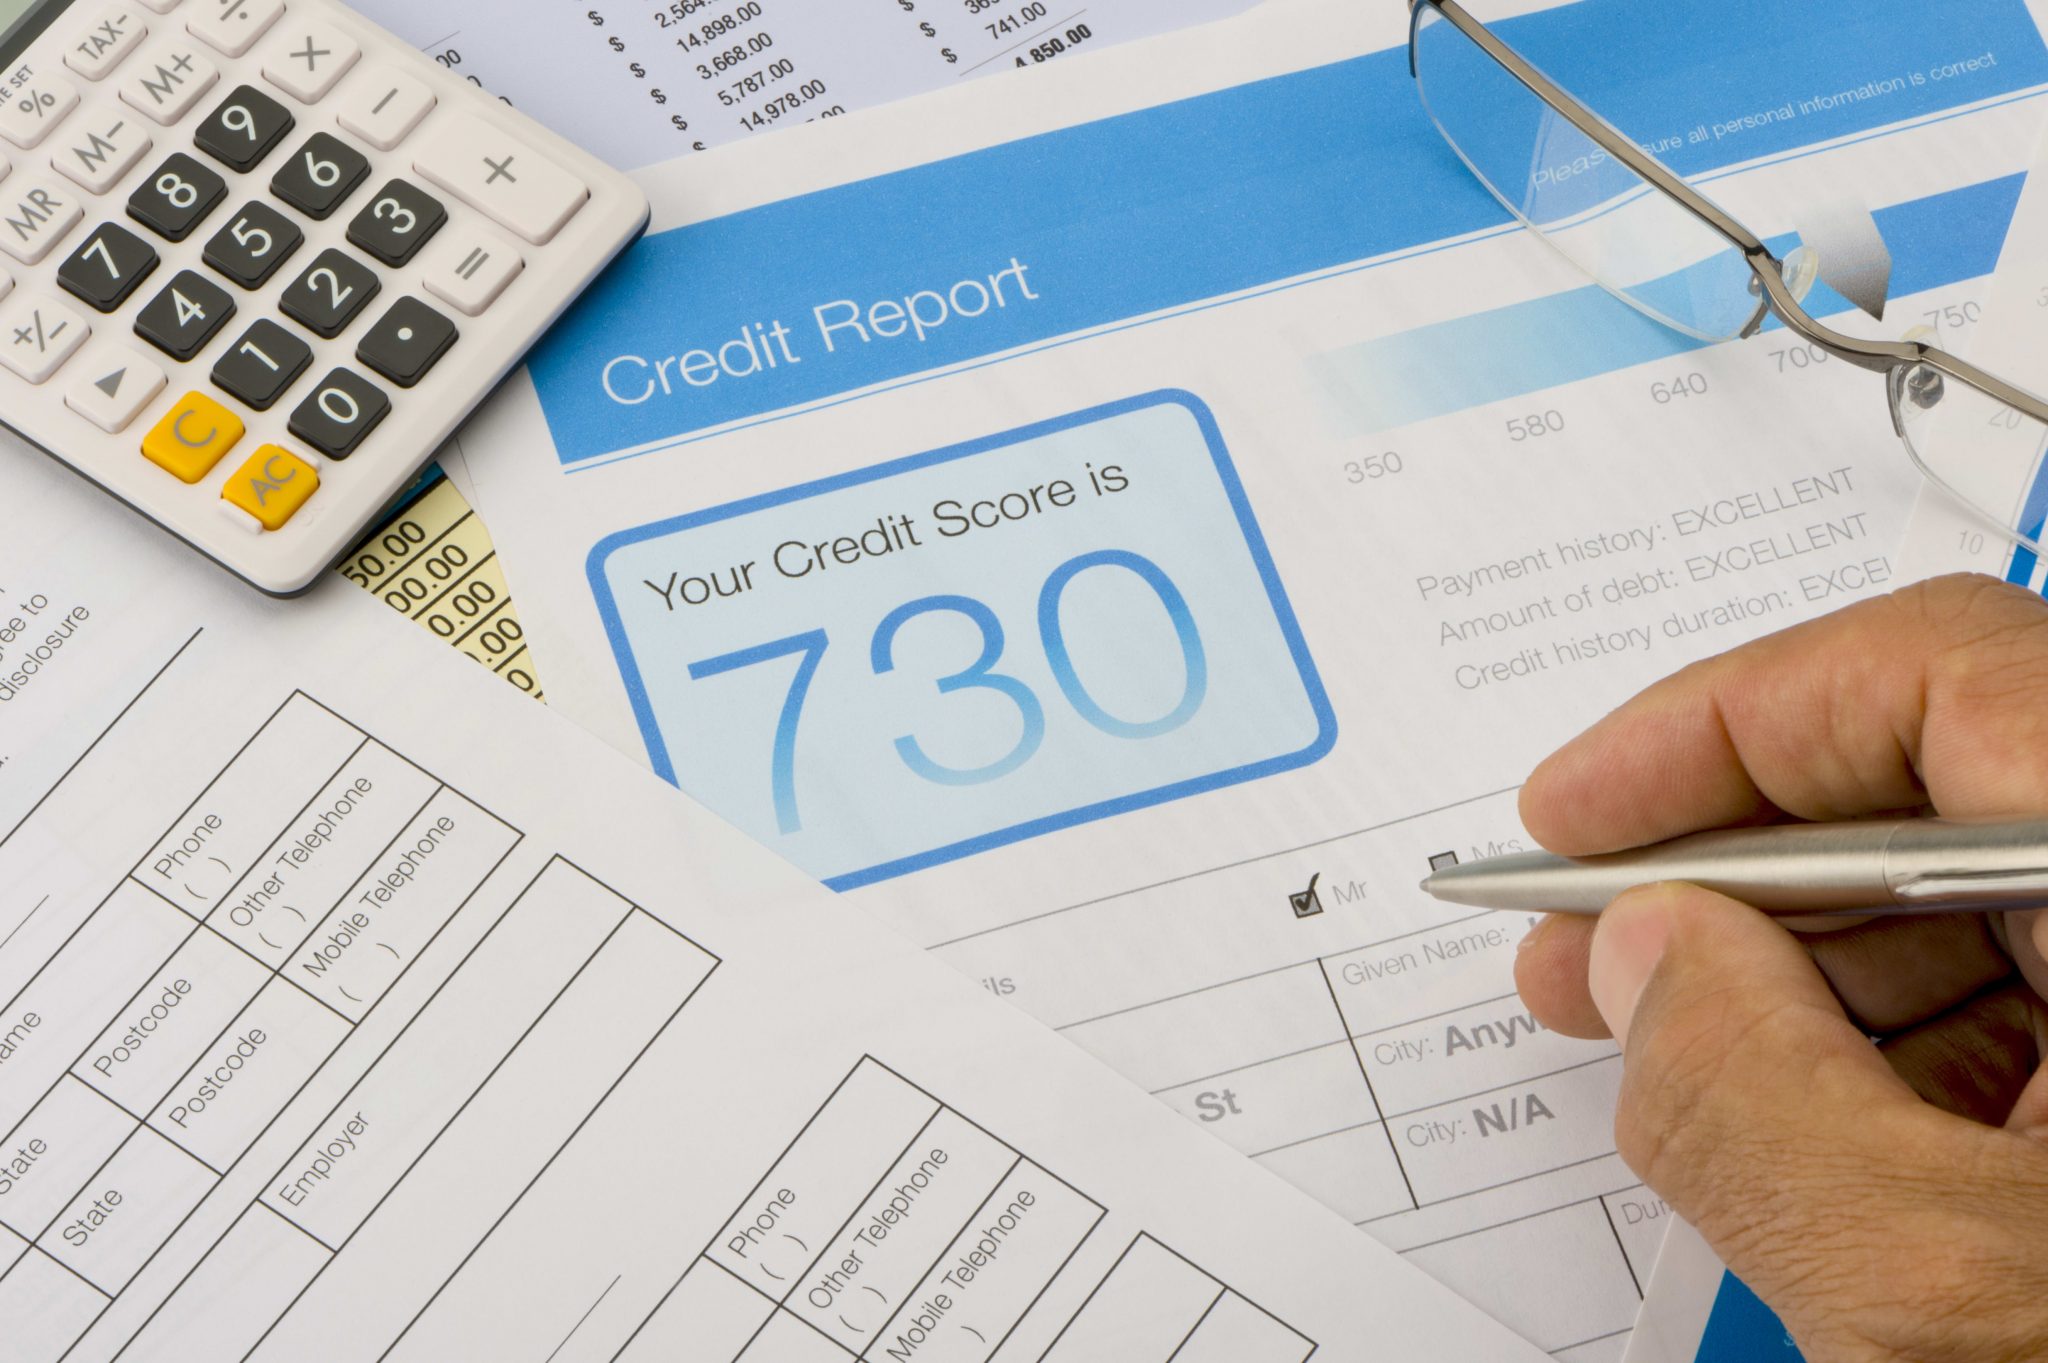 How To Get A Free Credit Report?